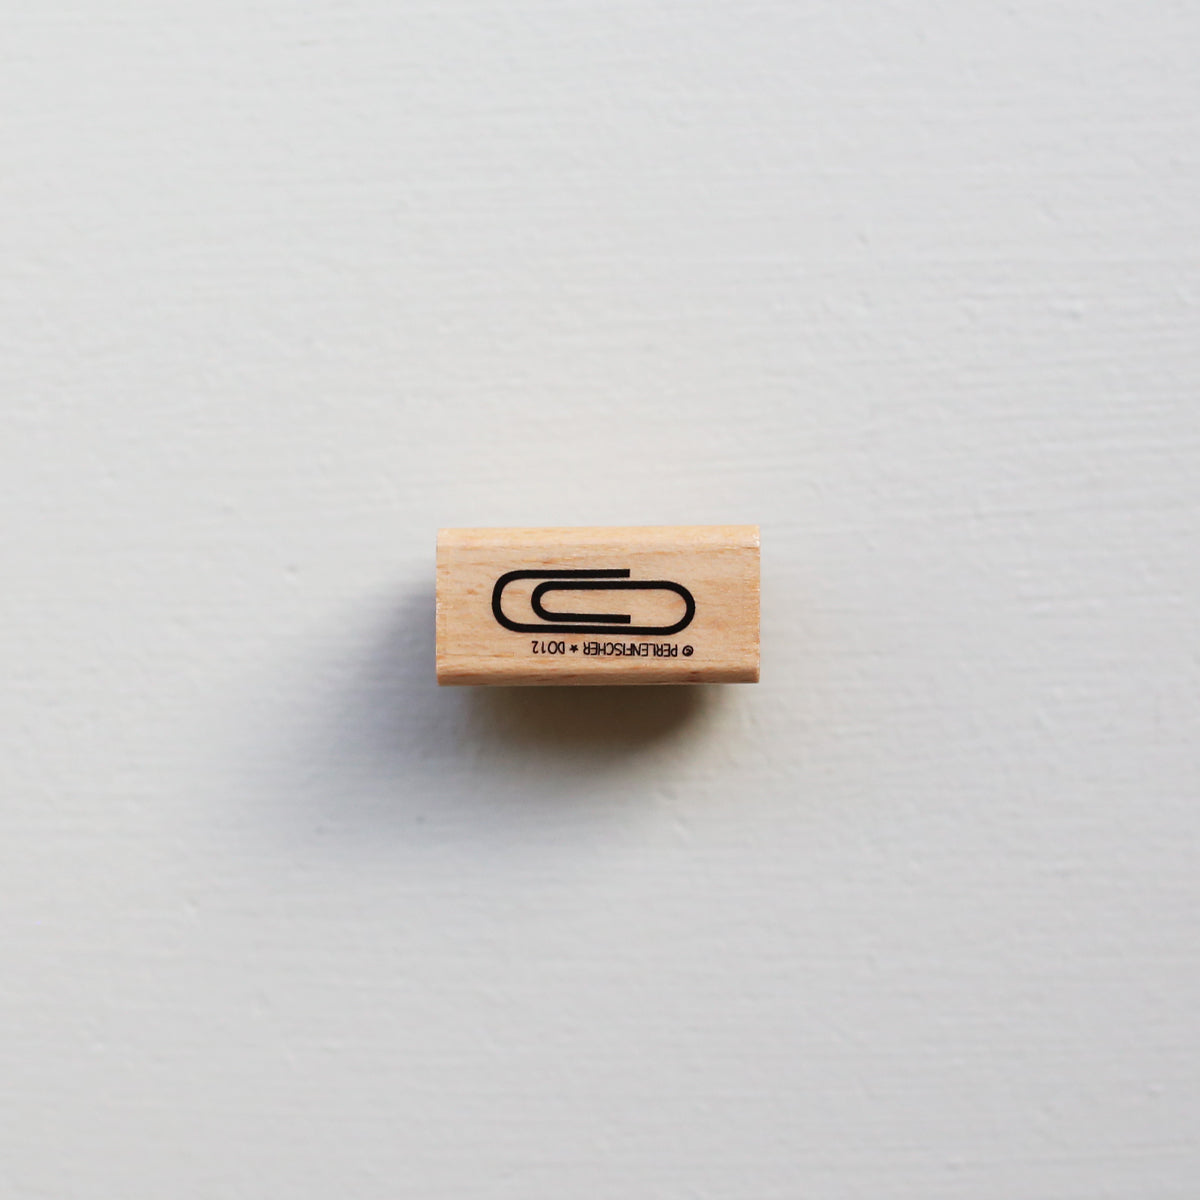 RUBBER STAMP // PAPER CLIP